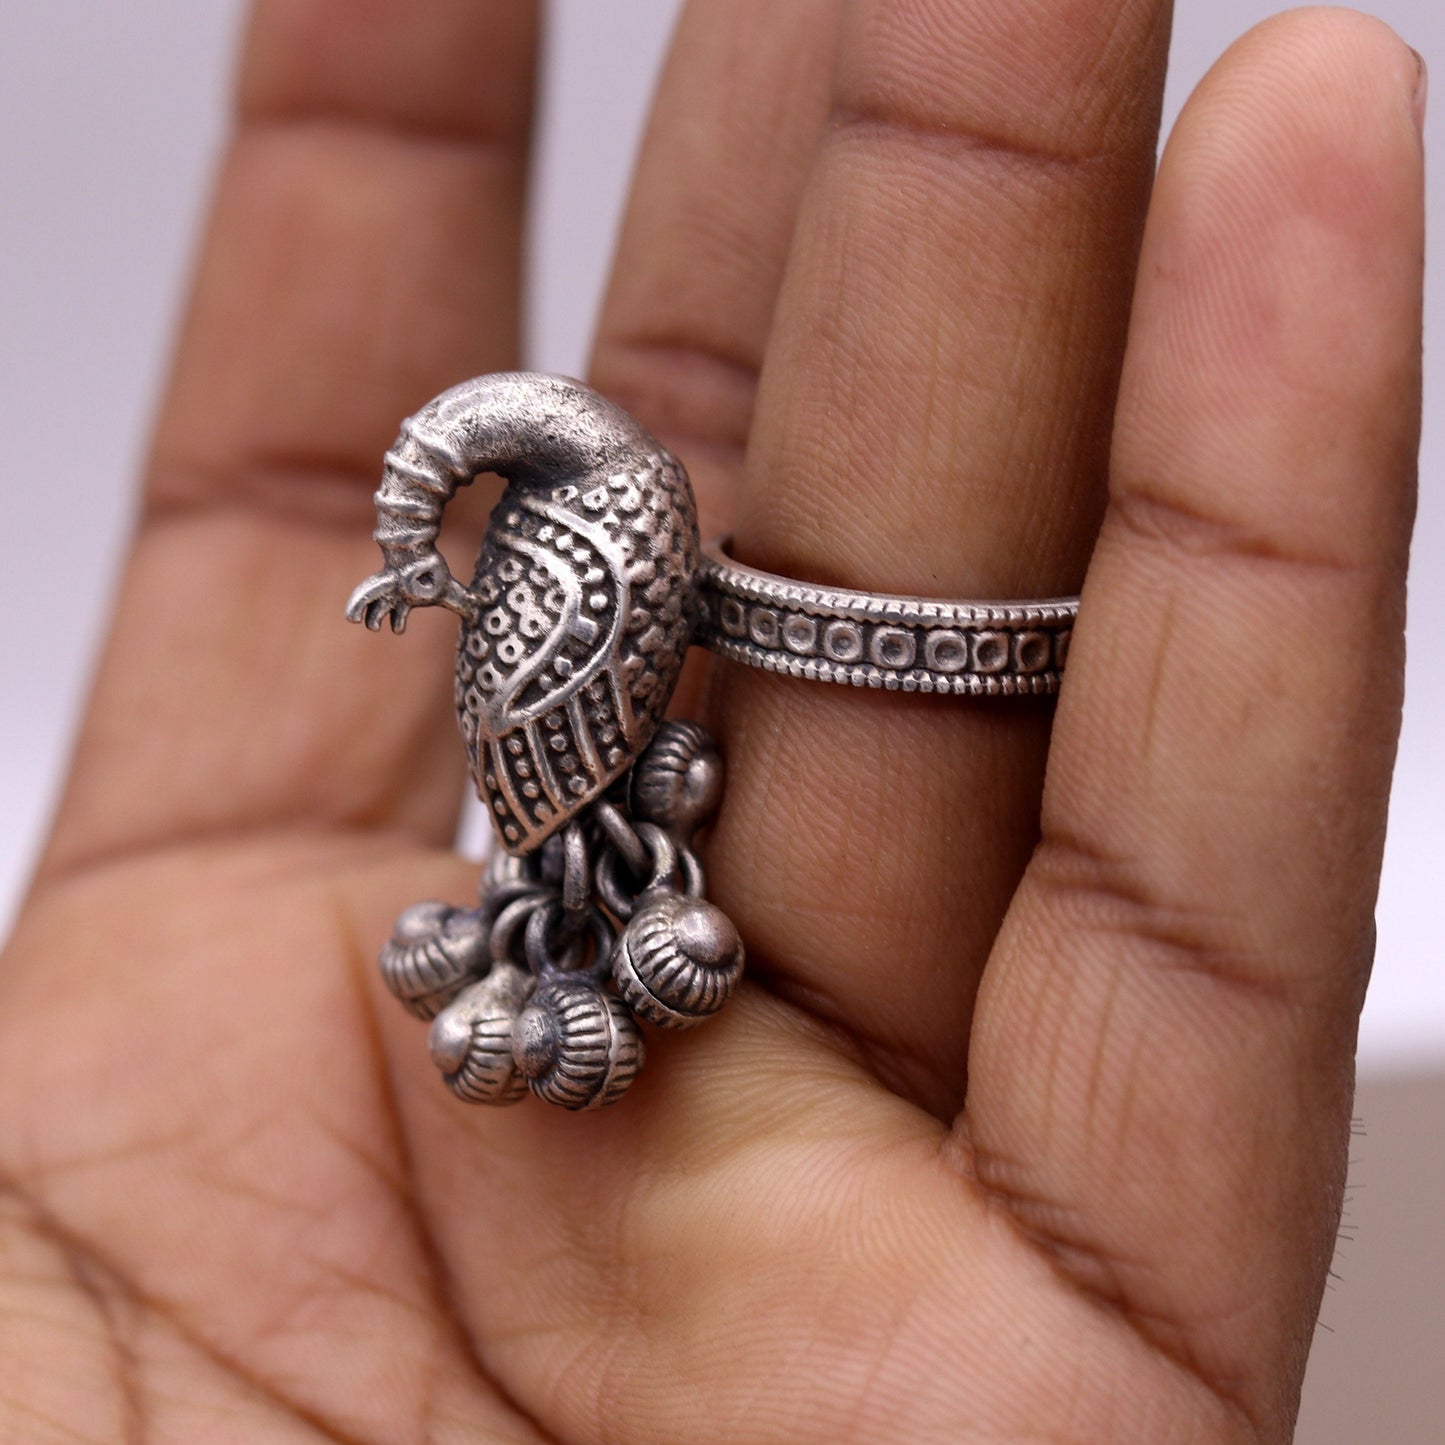 925 sterling silver handmade fabulous peacock design ring with amazing noisy jingle bells excellent customized jewelry for belly dance sr266 - TRIBAL ORNAMENTS